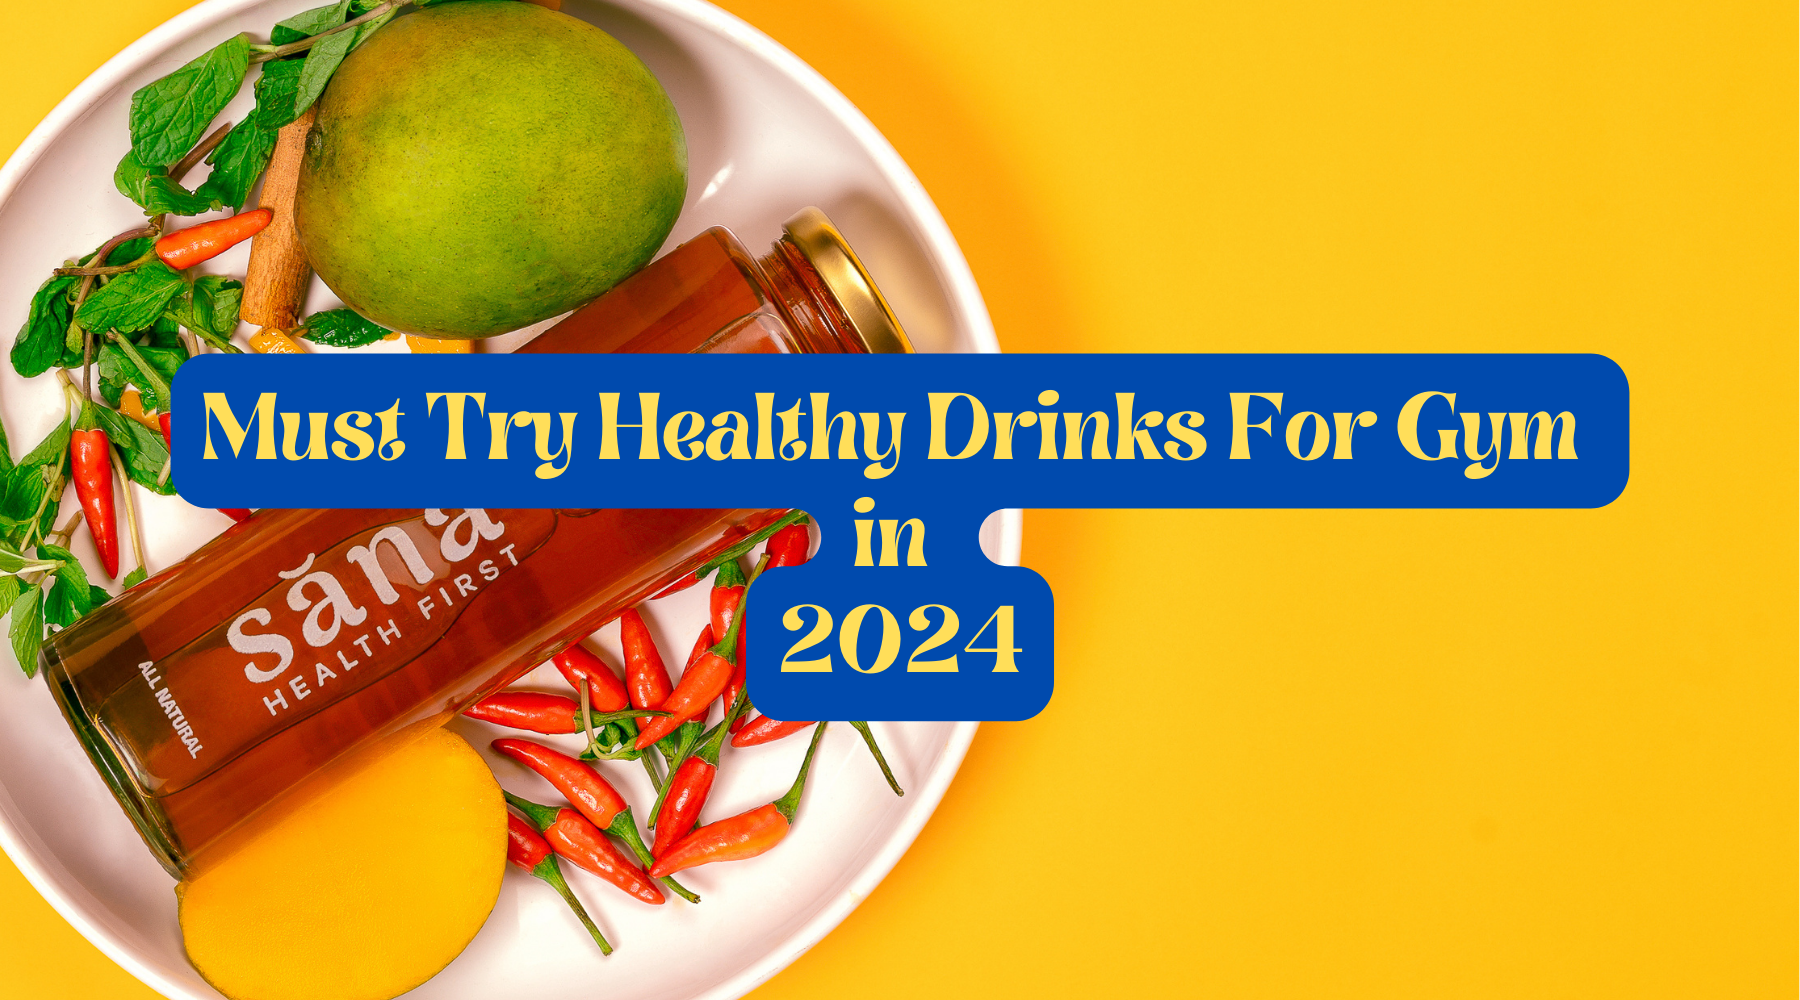 Must Try Healthy Drinks For Gym in 2024